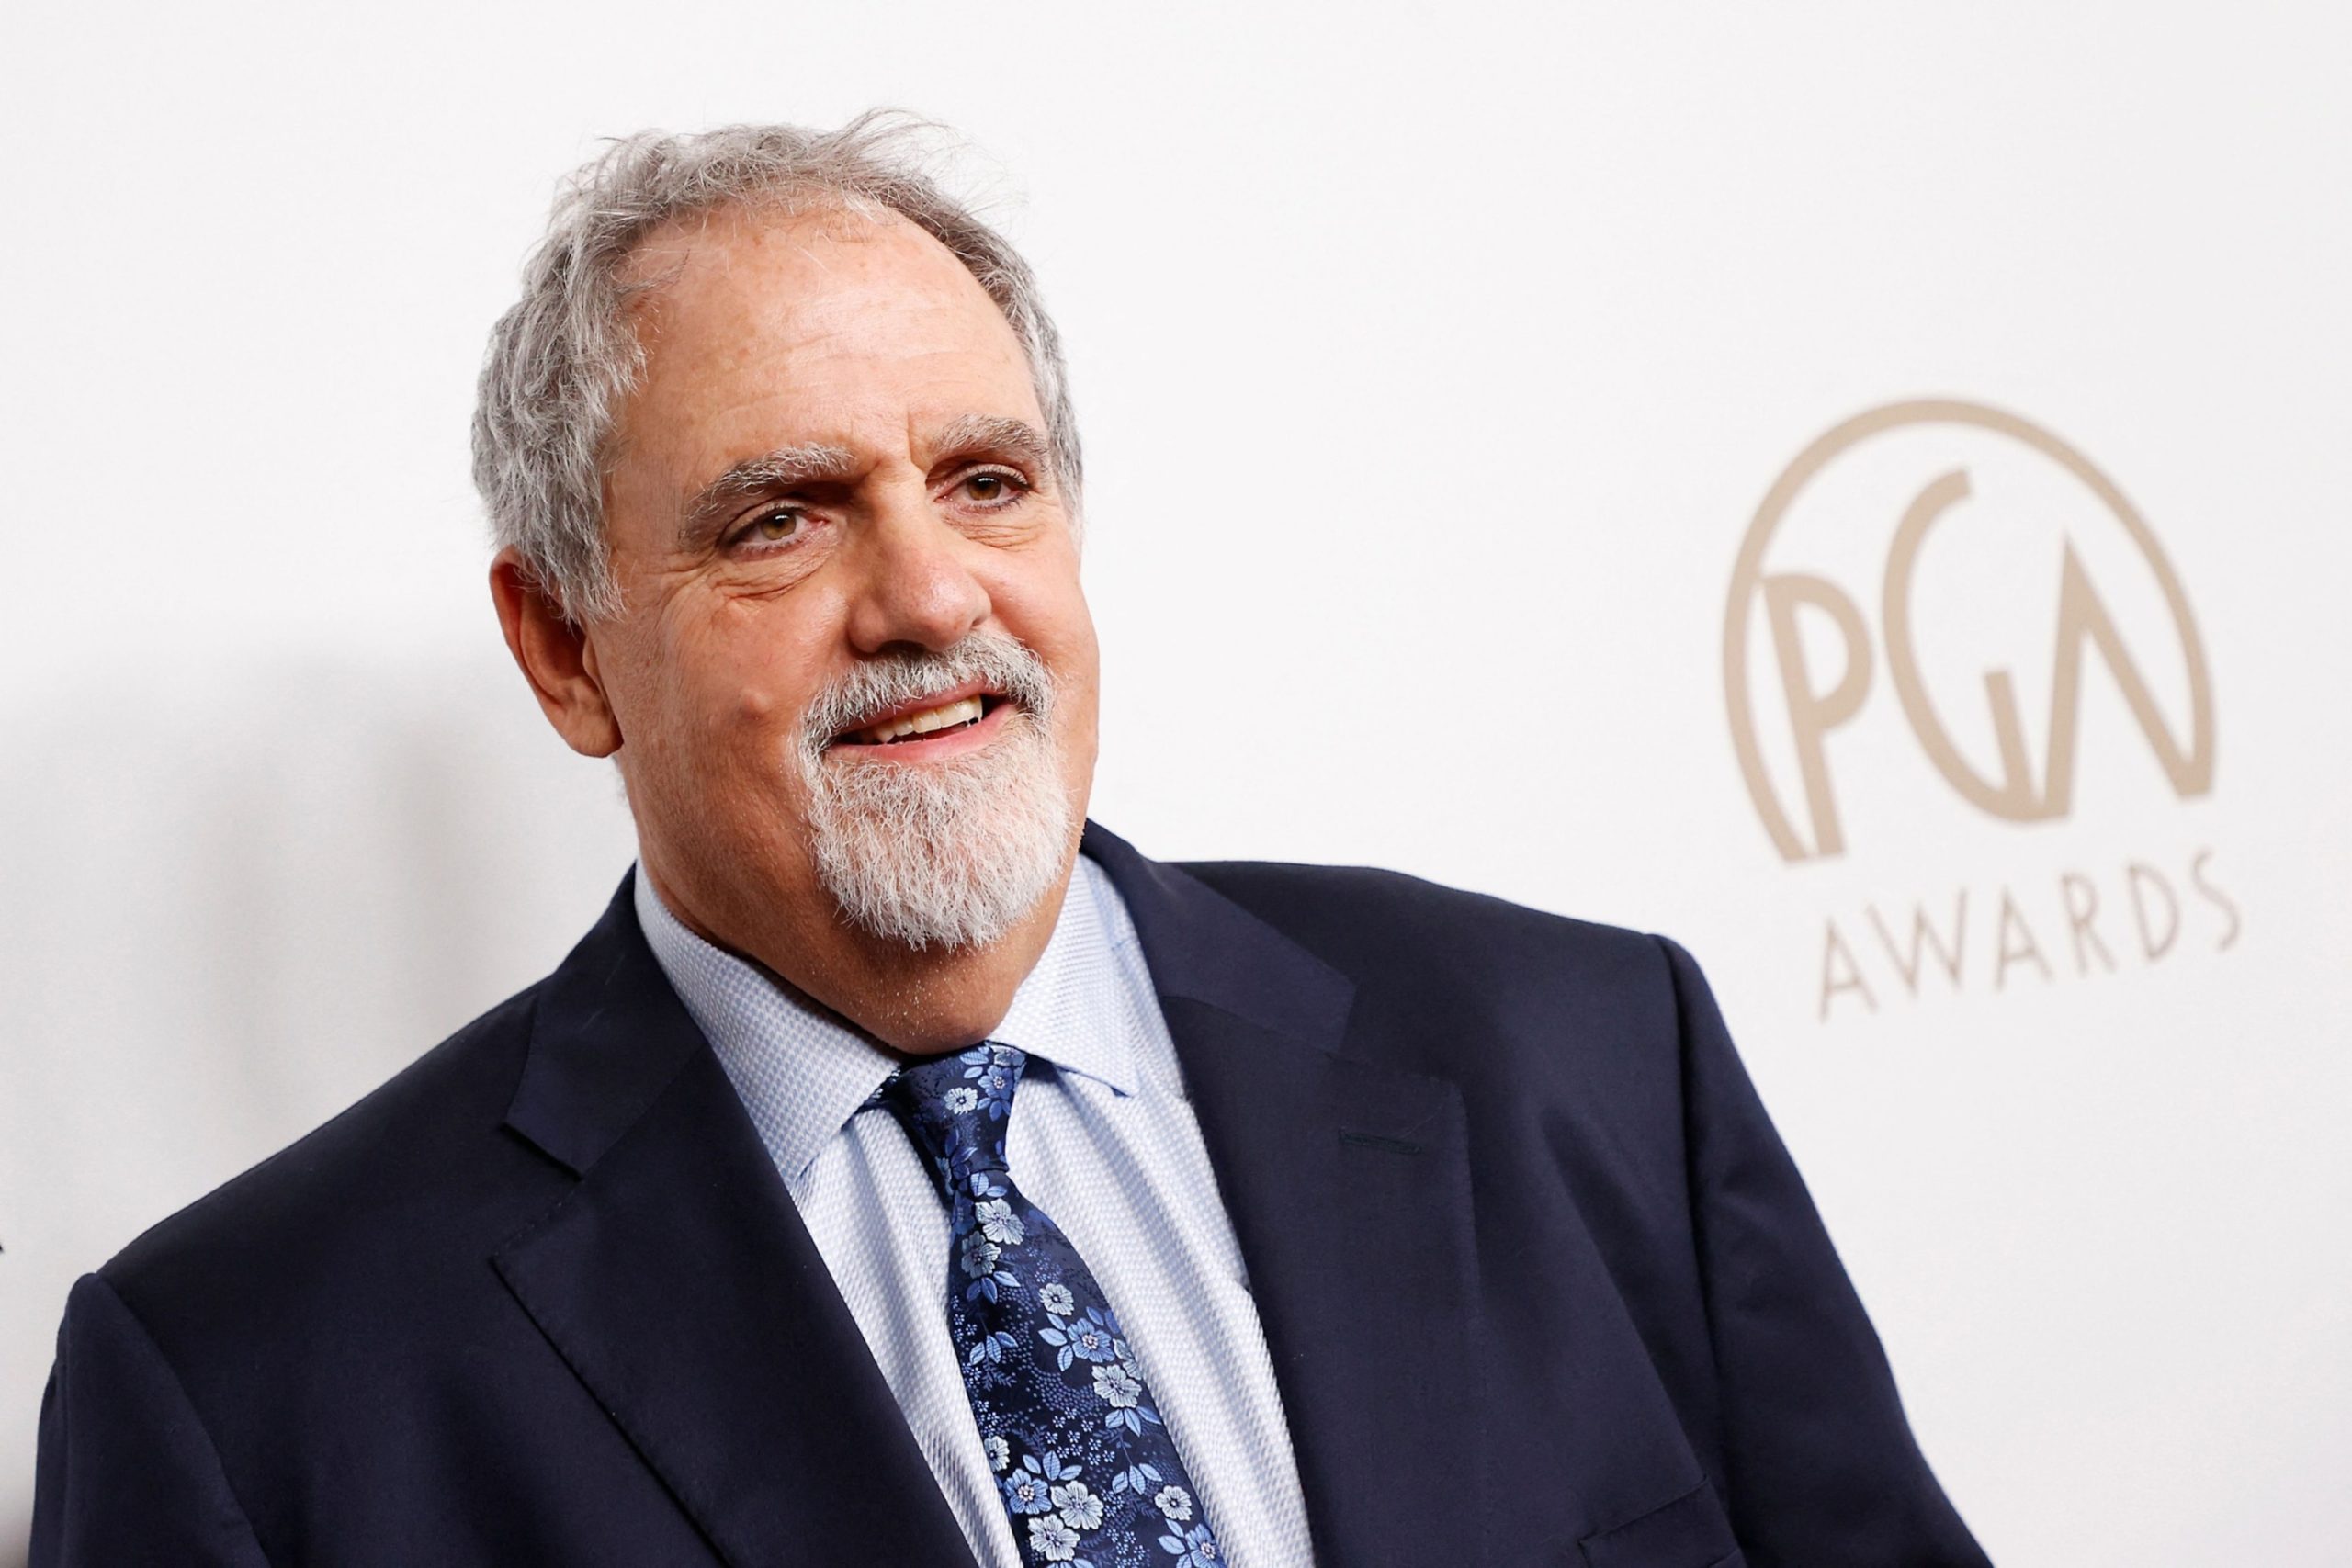 Jon Landau, the producer behind the Oscar-winning films 'Titanic' and 'Avatar', passes away at the age of 63